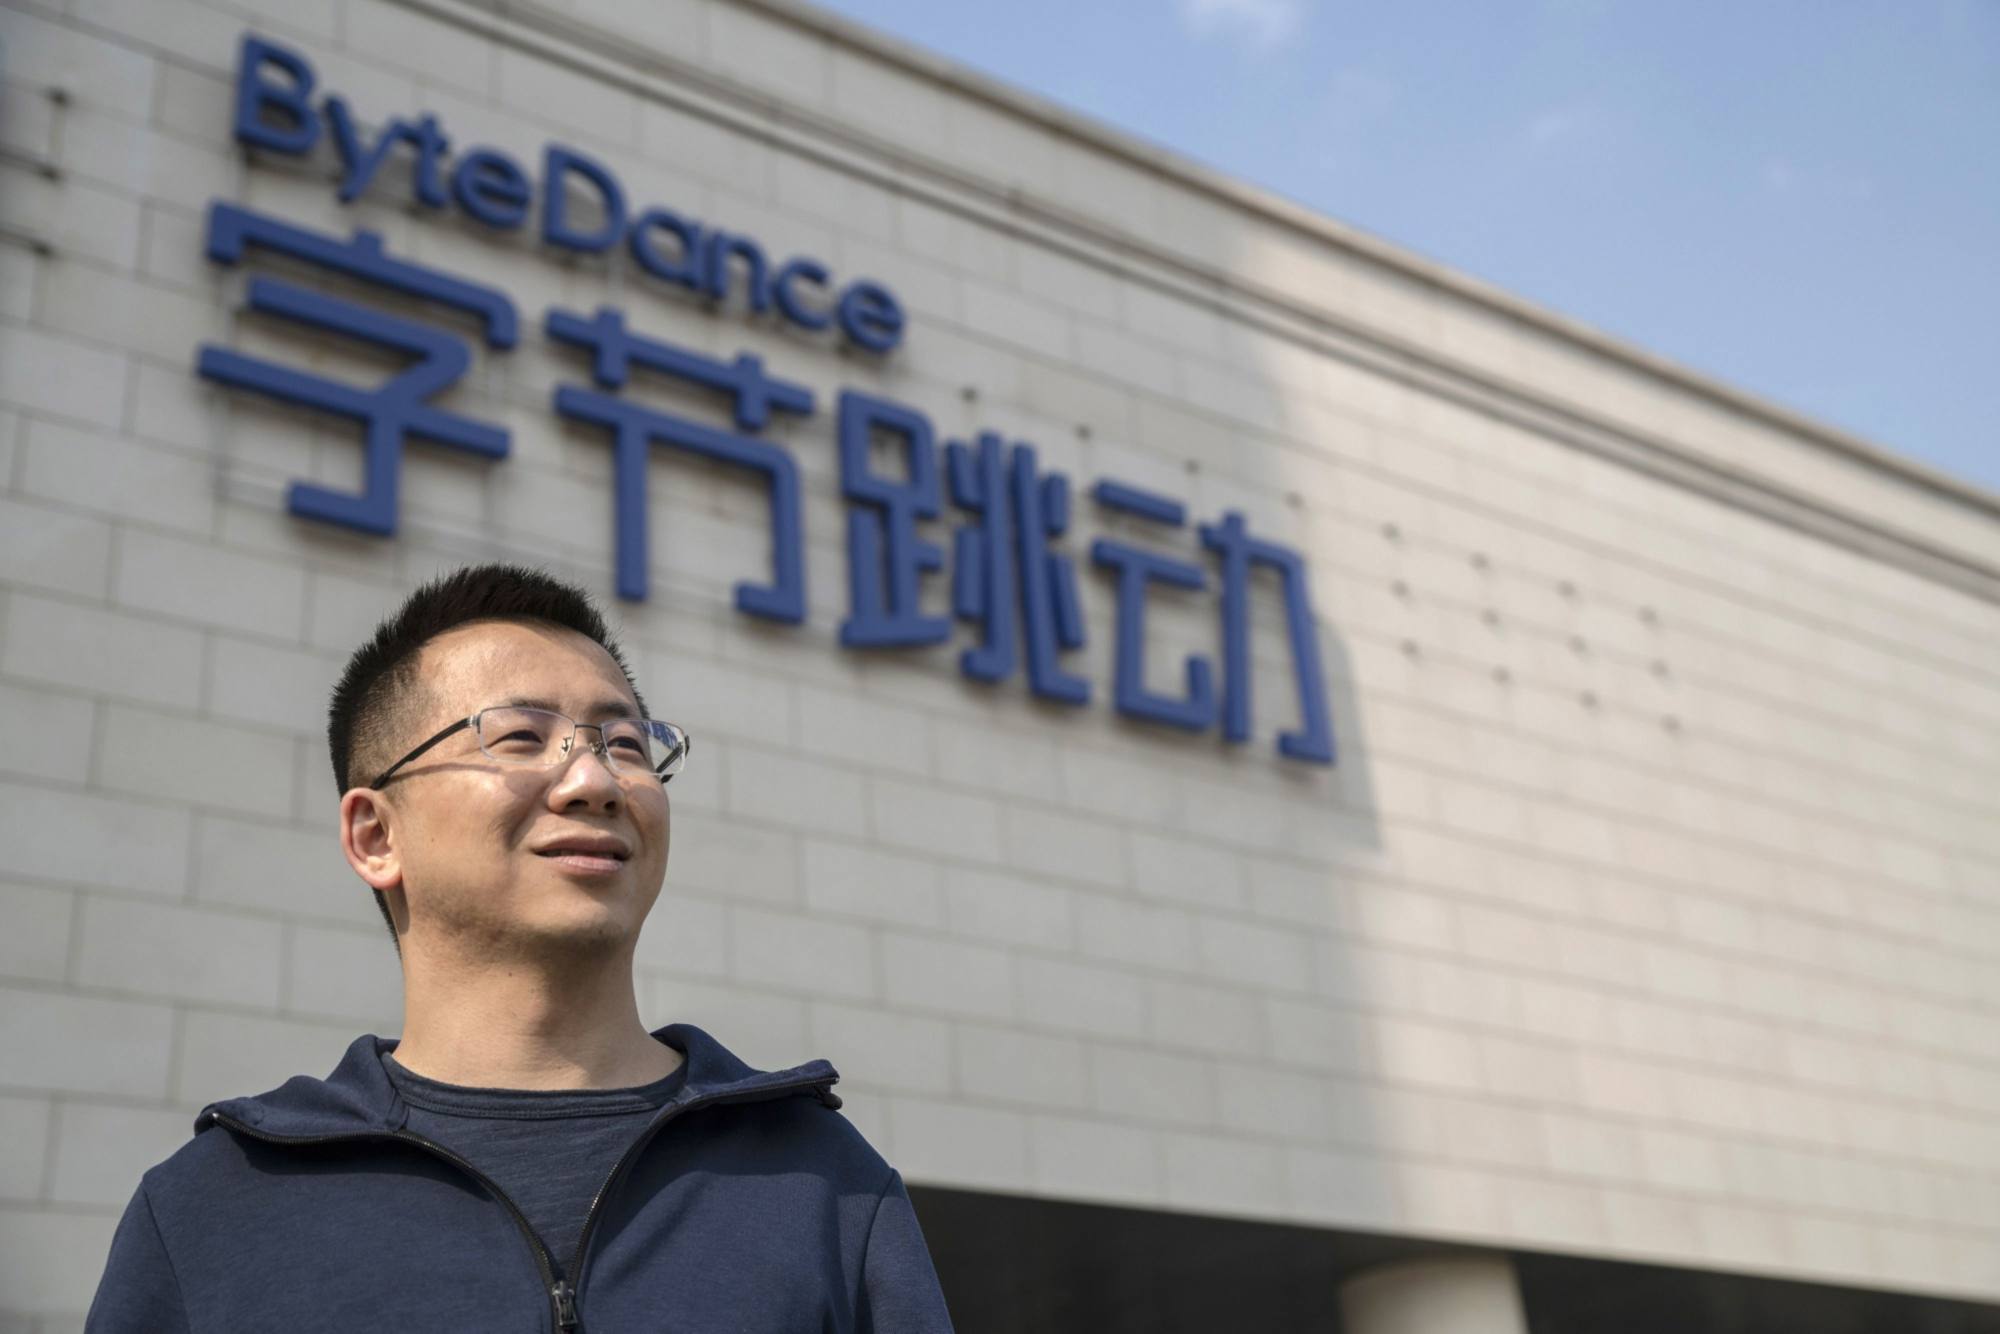 Zhang Yiming, CEO and founder of Bytedance, dropped from second place to third among Chinese billionaires, according to the list. Photo: Bloomberg